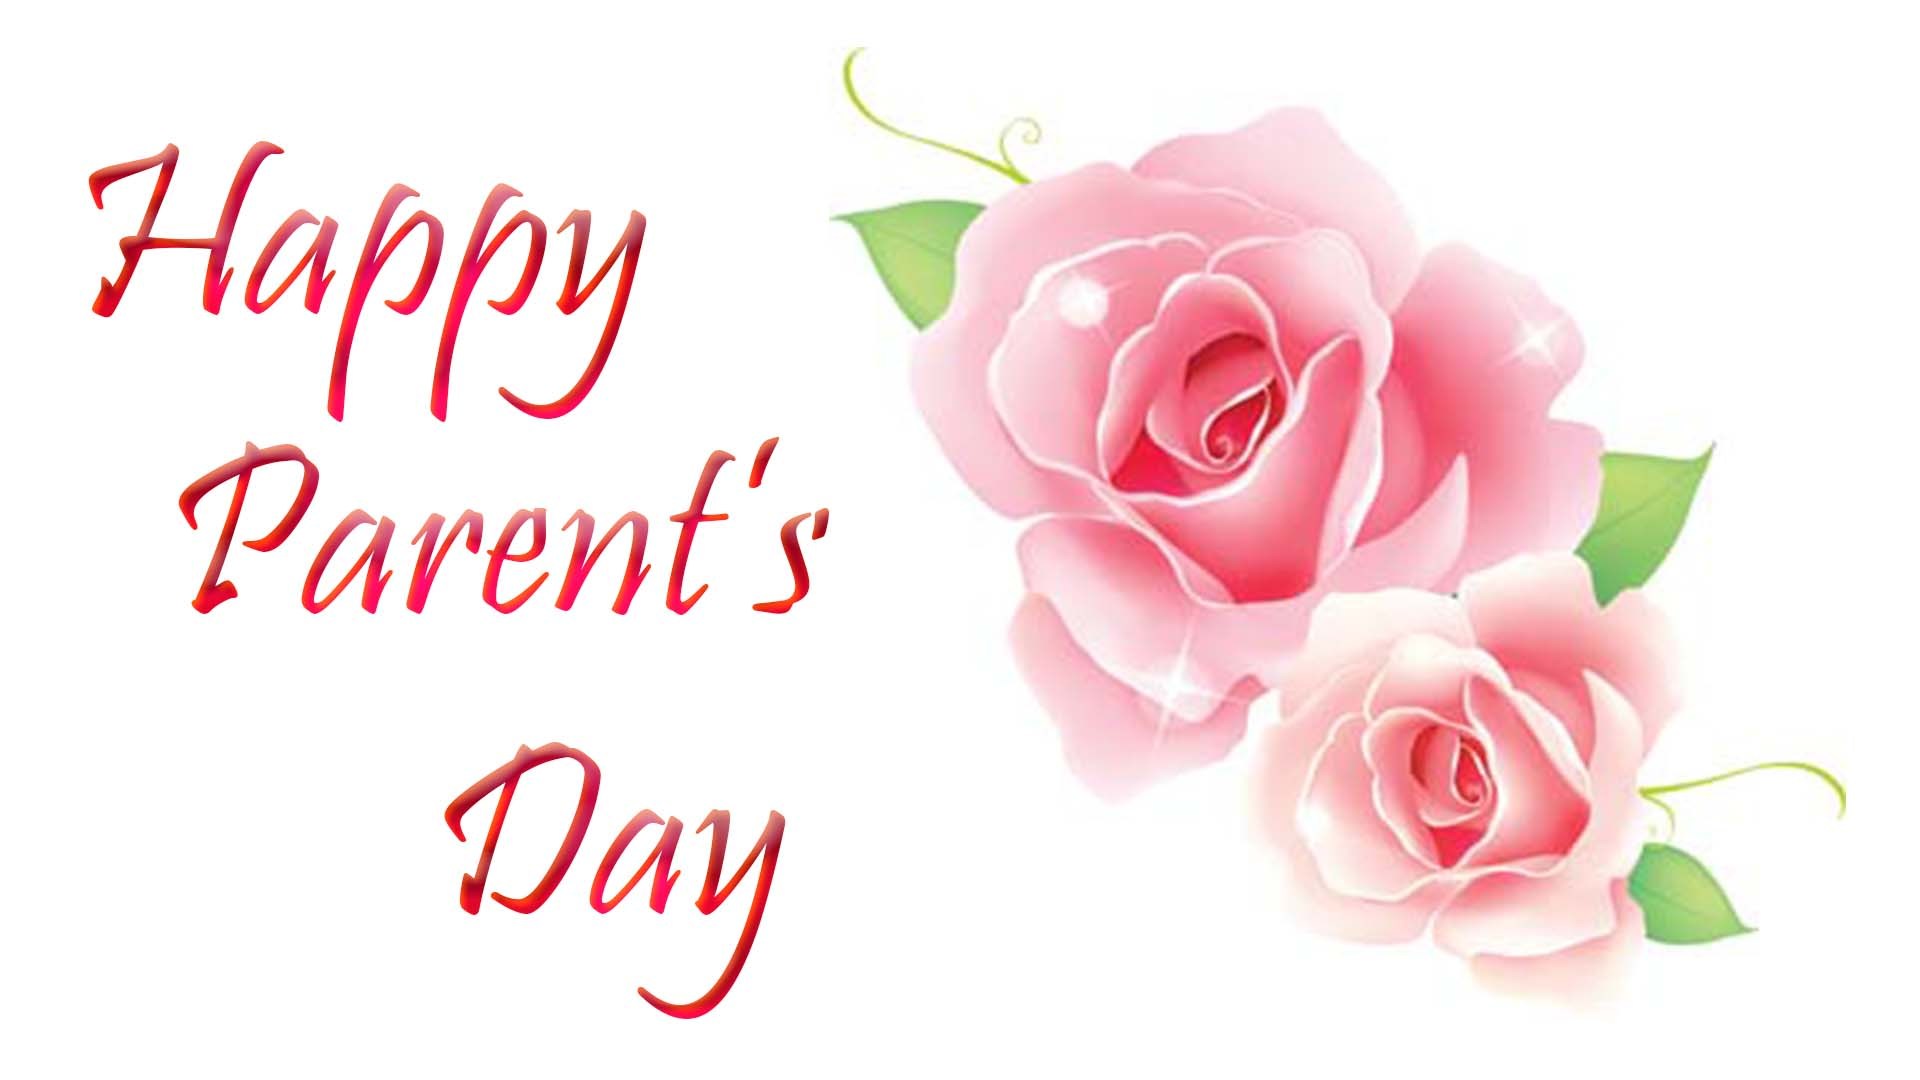 Happy Parents Day Images & Hd Pictures - Garden Roses , HD Wallpaper & Backgrounds